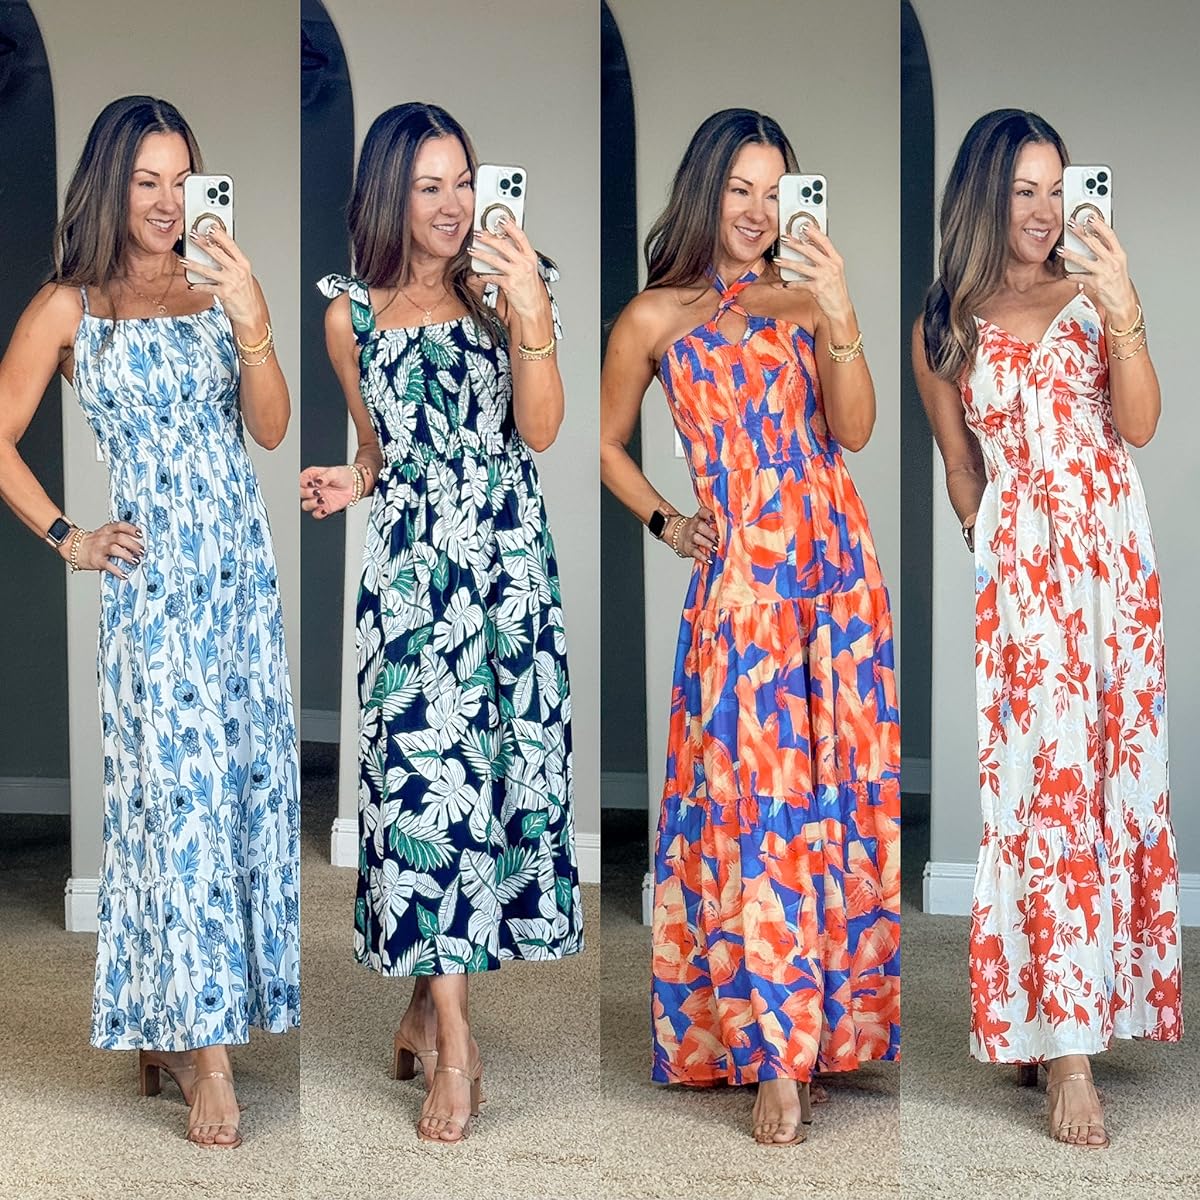 Spring into the season with these must-see dresses, accessories, and more | spring, spring fashion, spring dress, spring dresses, maxi dress, floral dress, halter dress, vacation outfit, resort wear, resort style, heels